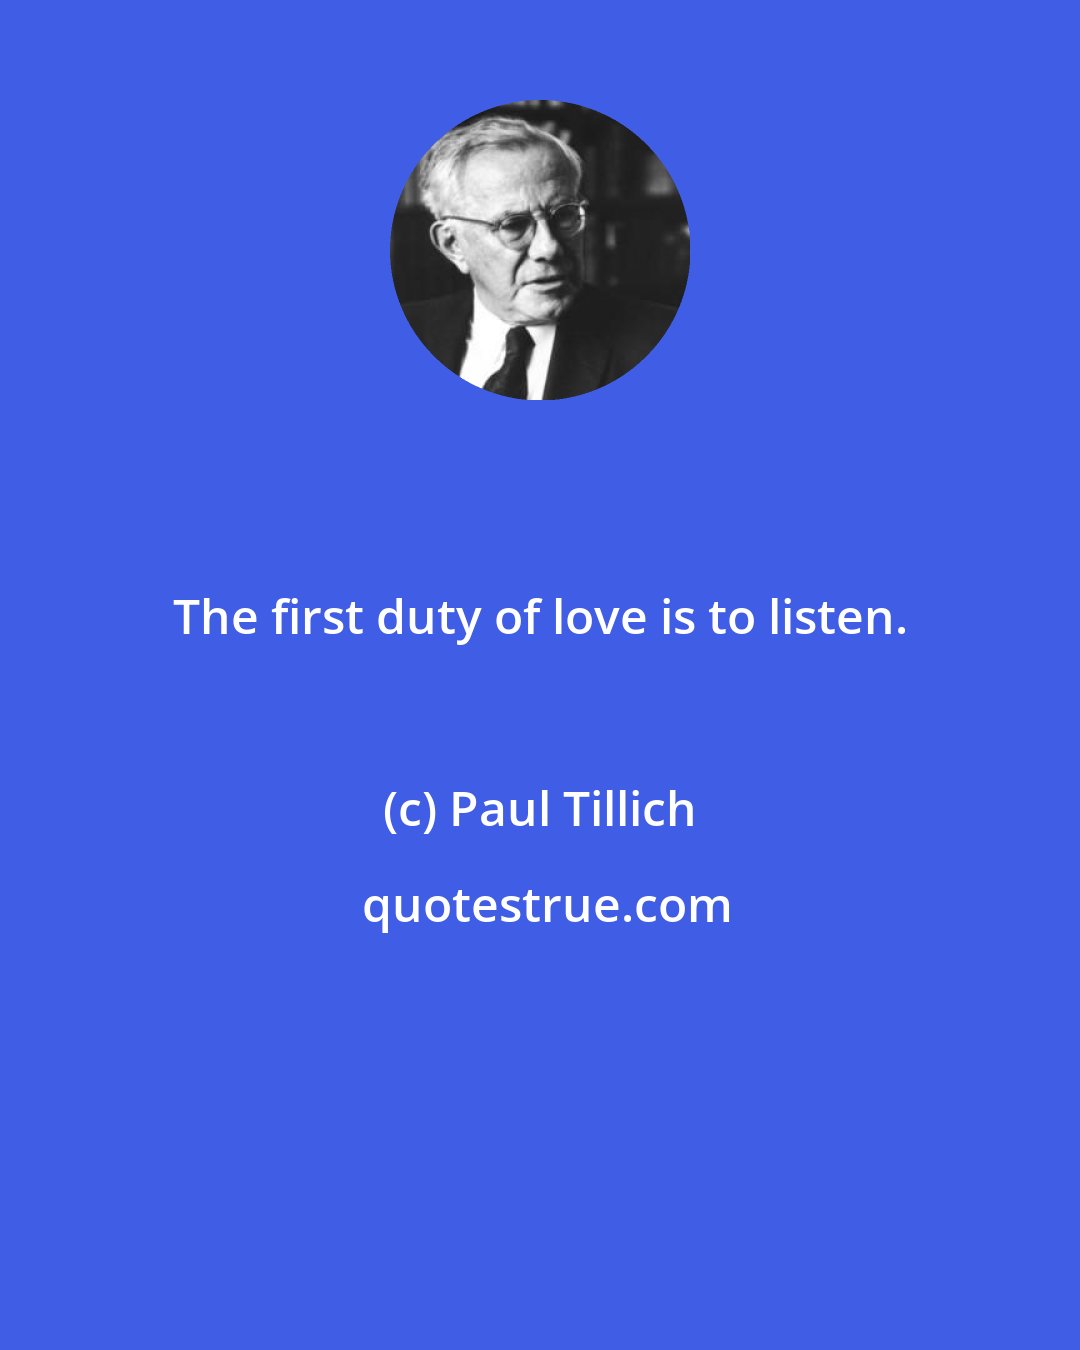 Paul Tillich: The first duty of love is to listen.